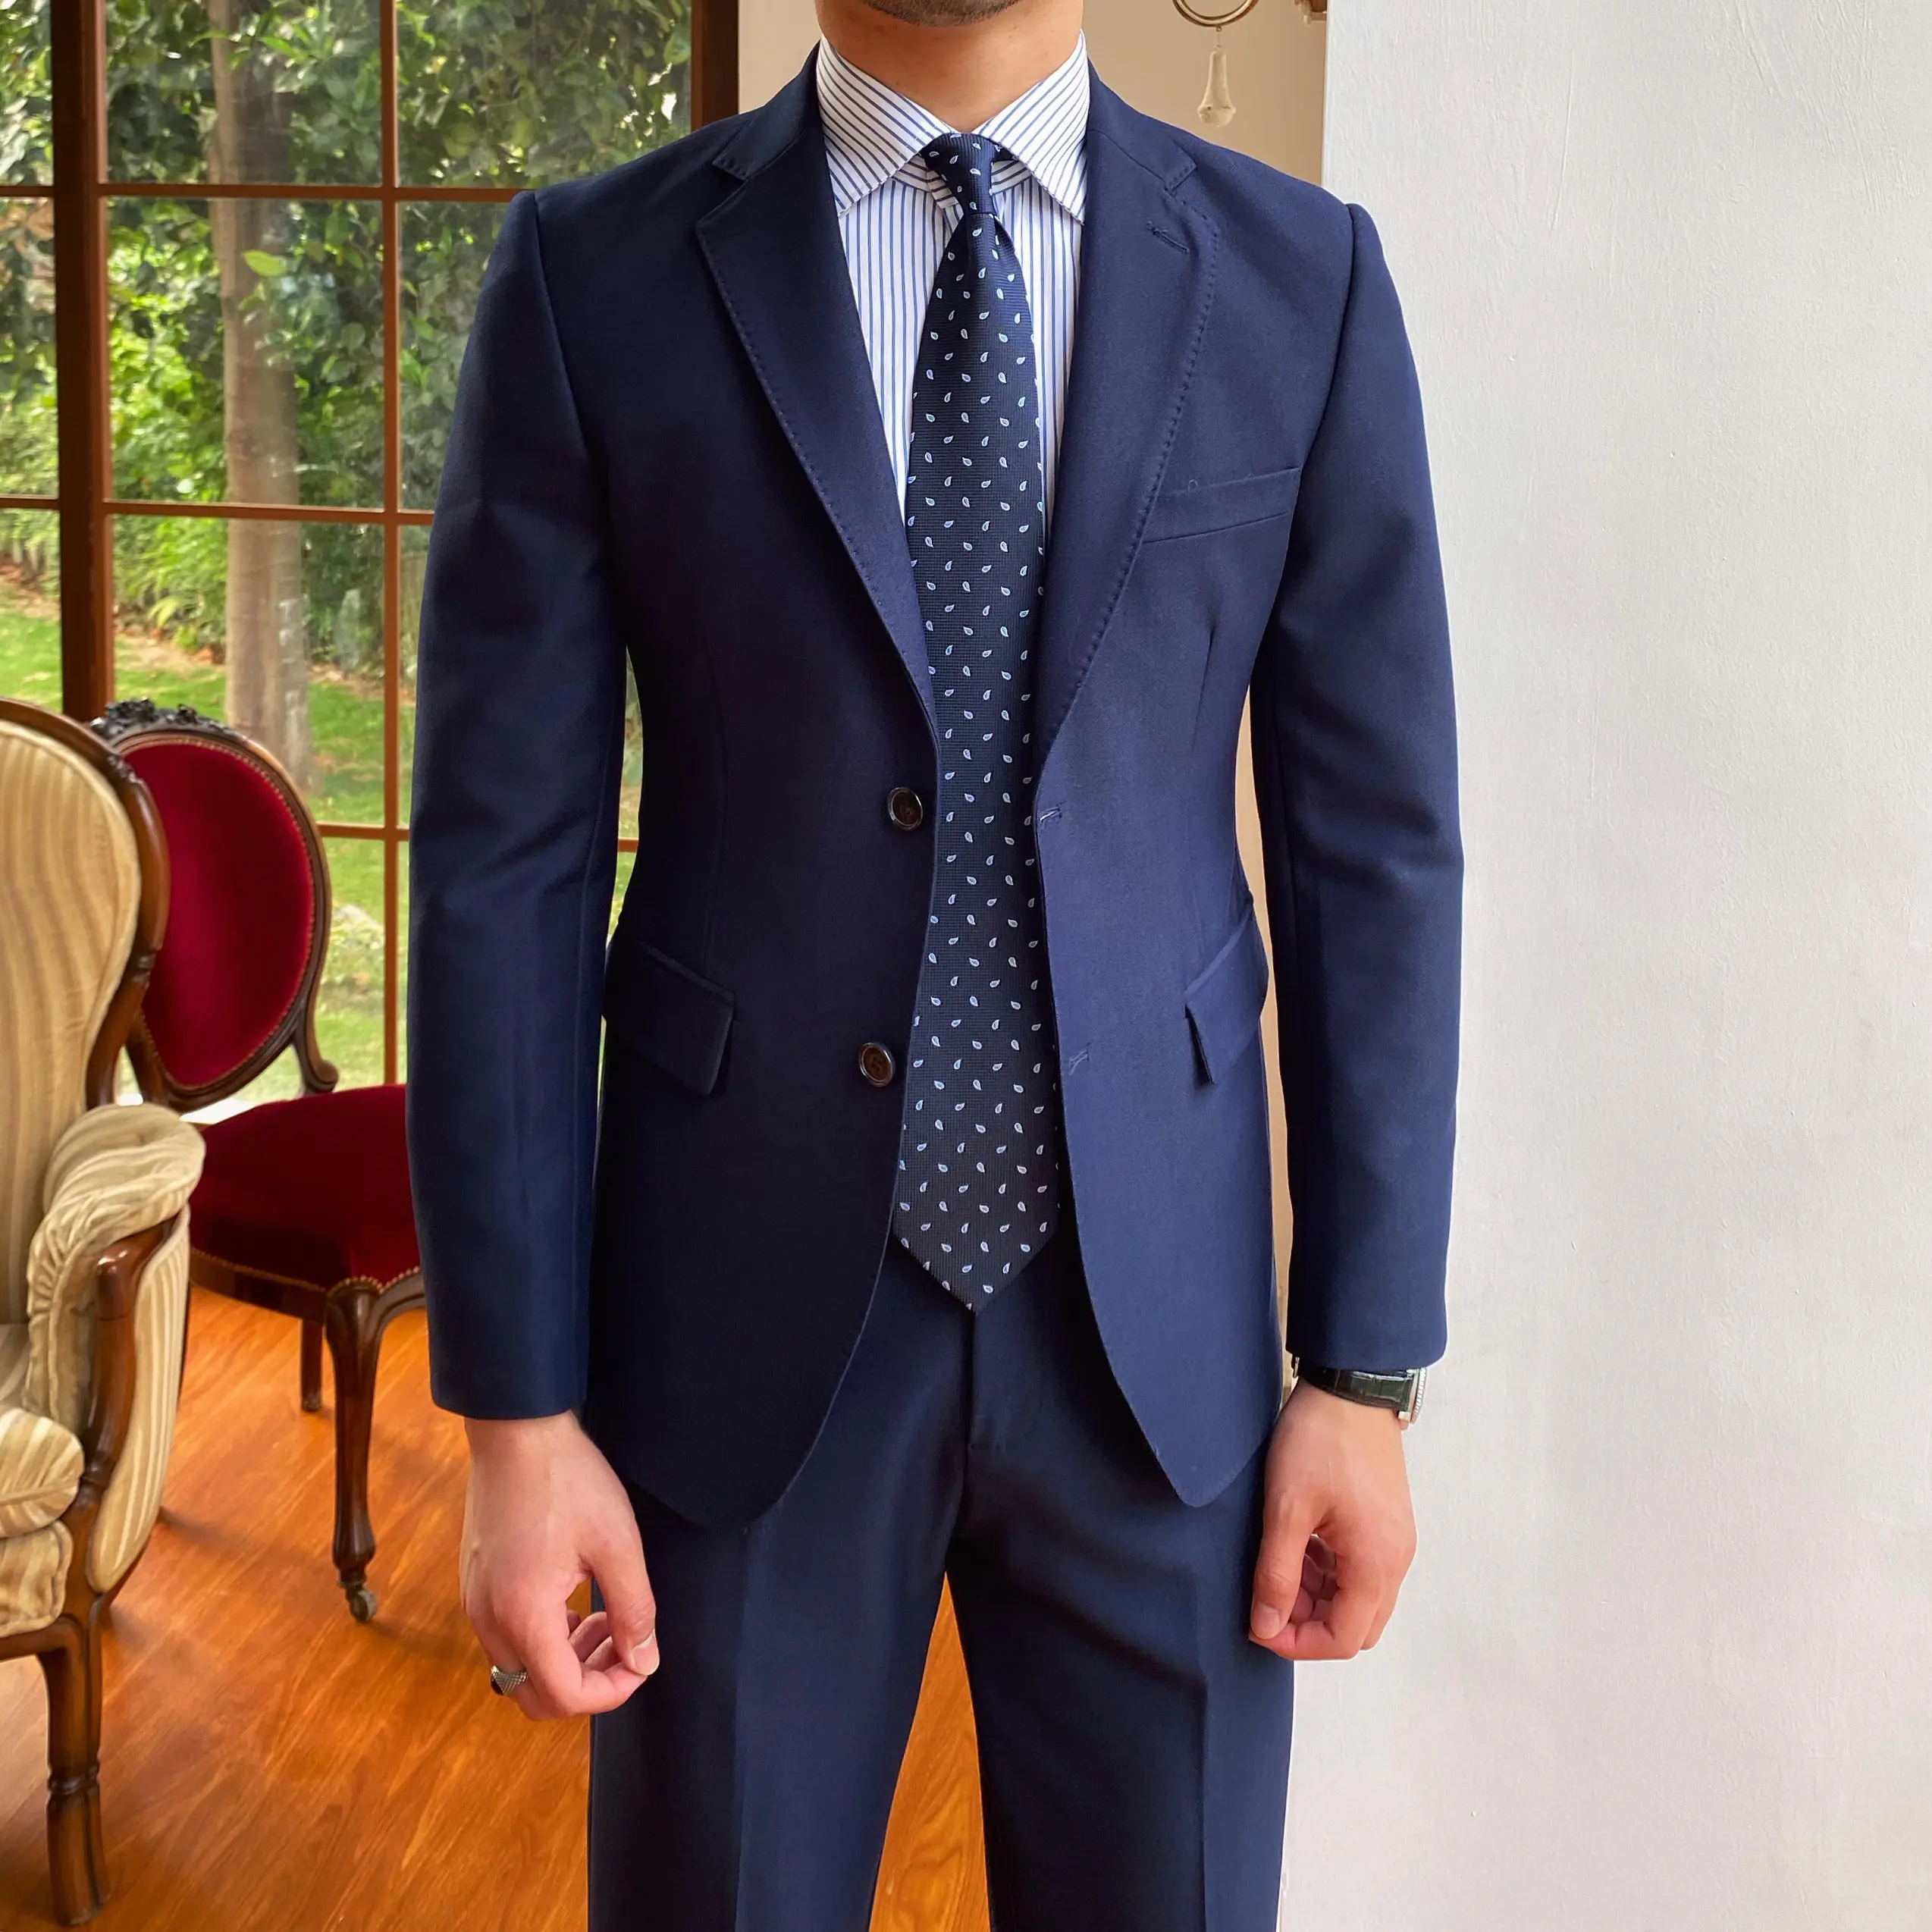 Asian-n factory direct wholesale of the latest fashion men's suit for the wedding fashion high-quality casual plus-size suit